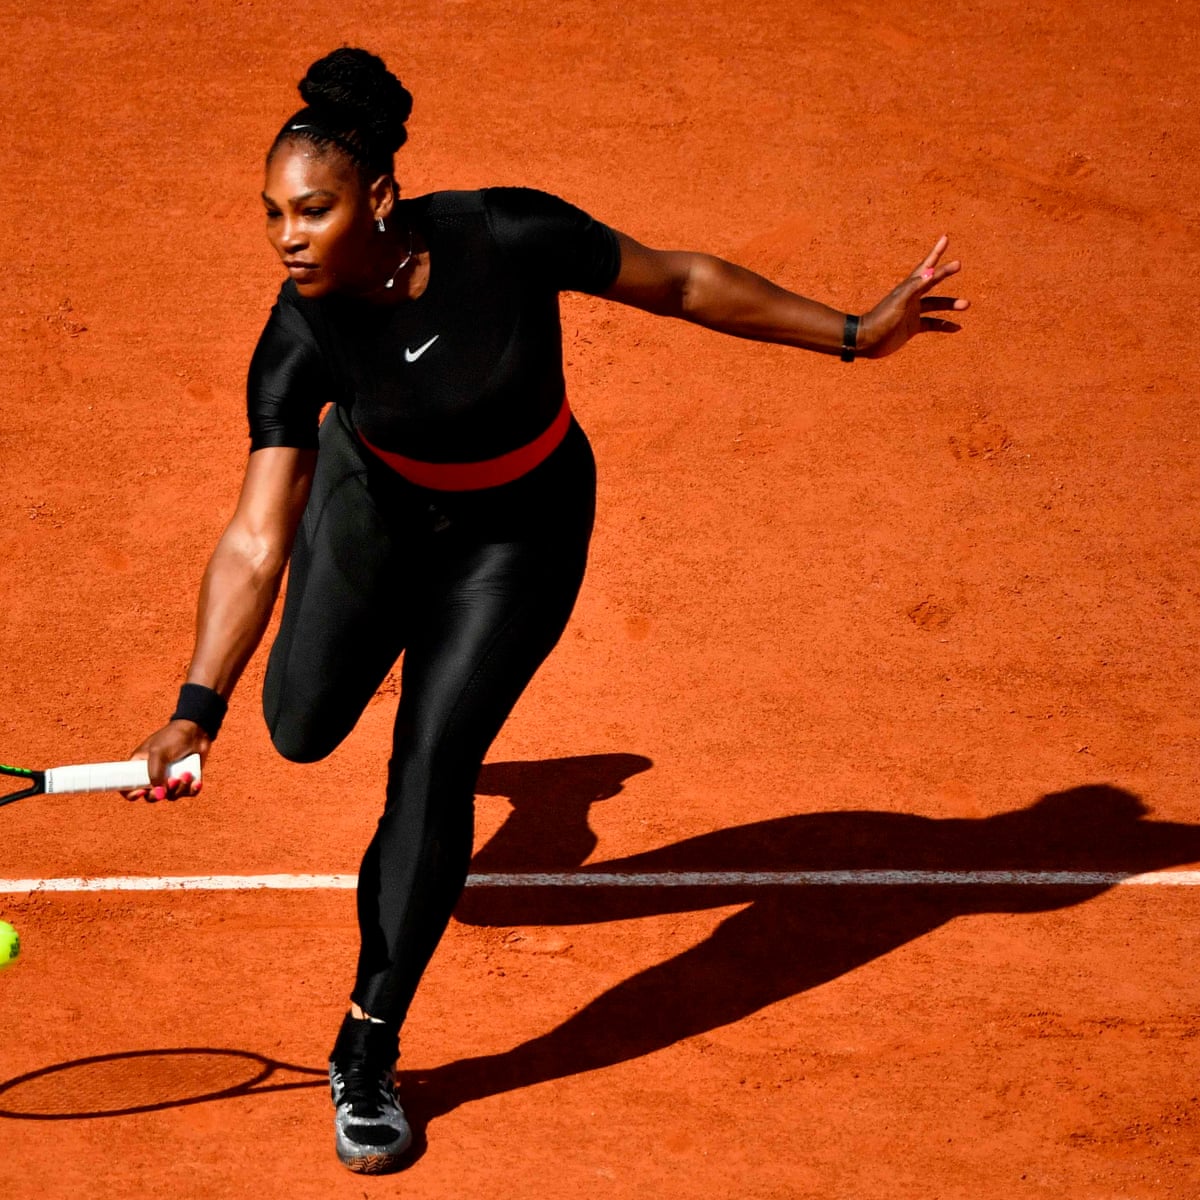 storting stel voor oosters My kind of fashion icon: Serena Williams has redefined how a tennis player  should dress | Fashion | The Guardian